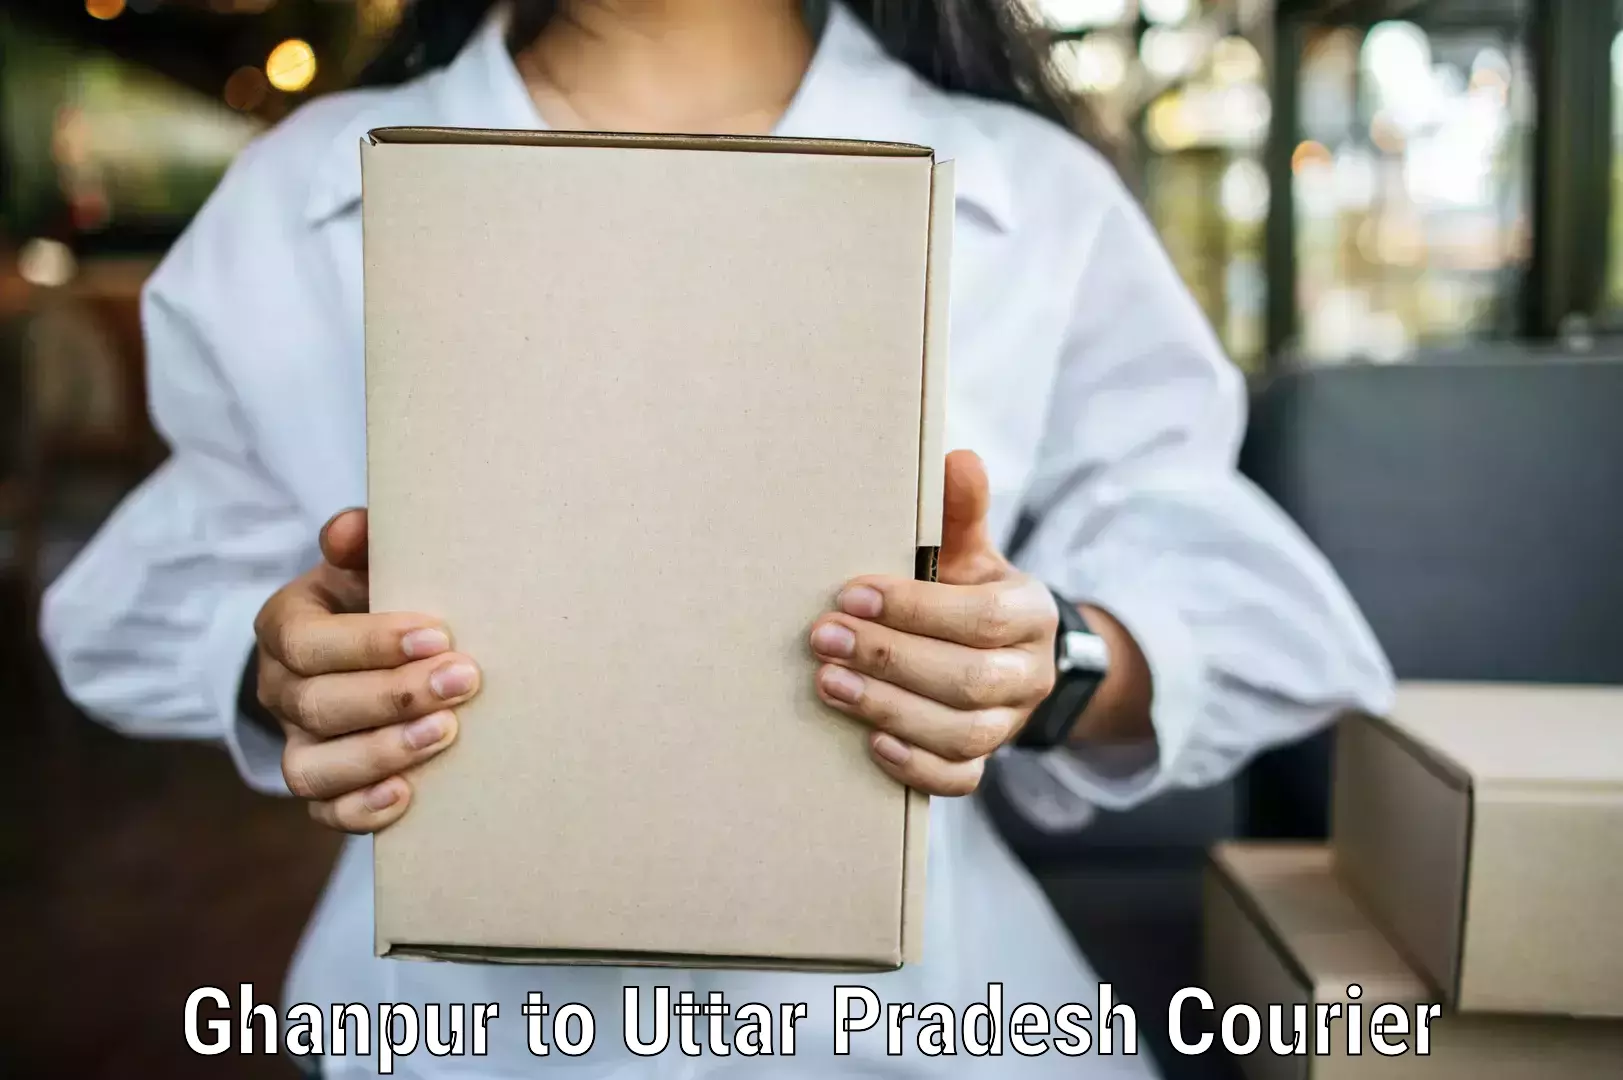 On-demand shipping options Ghanpur to Mathura